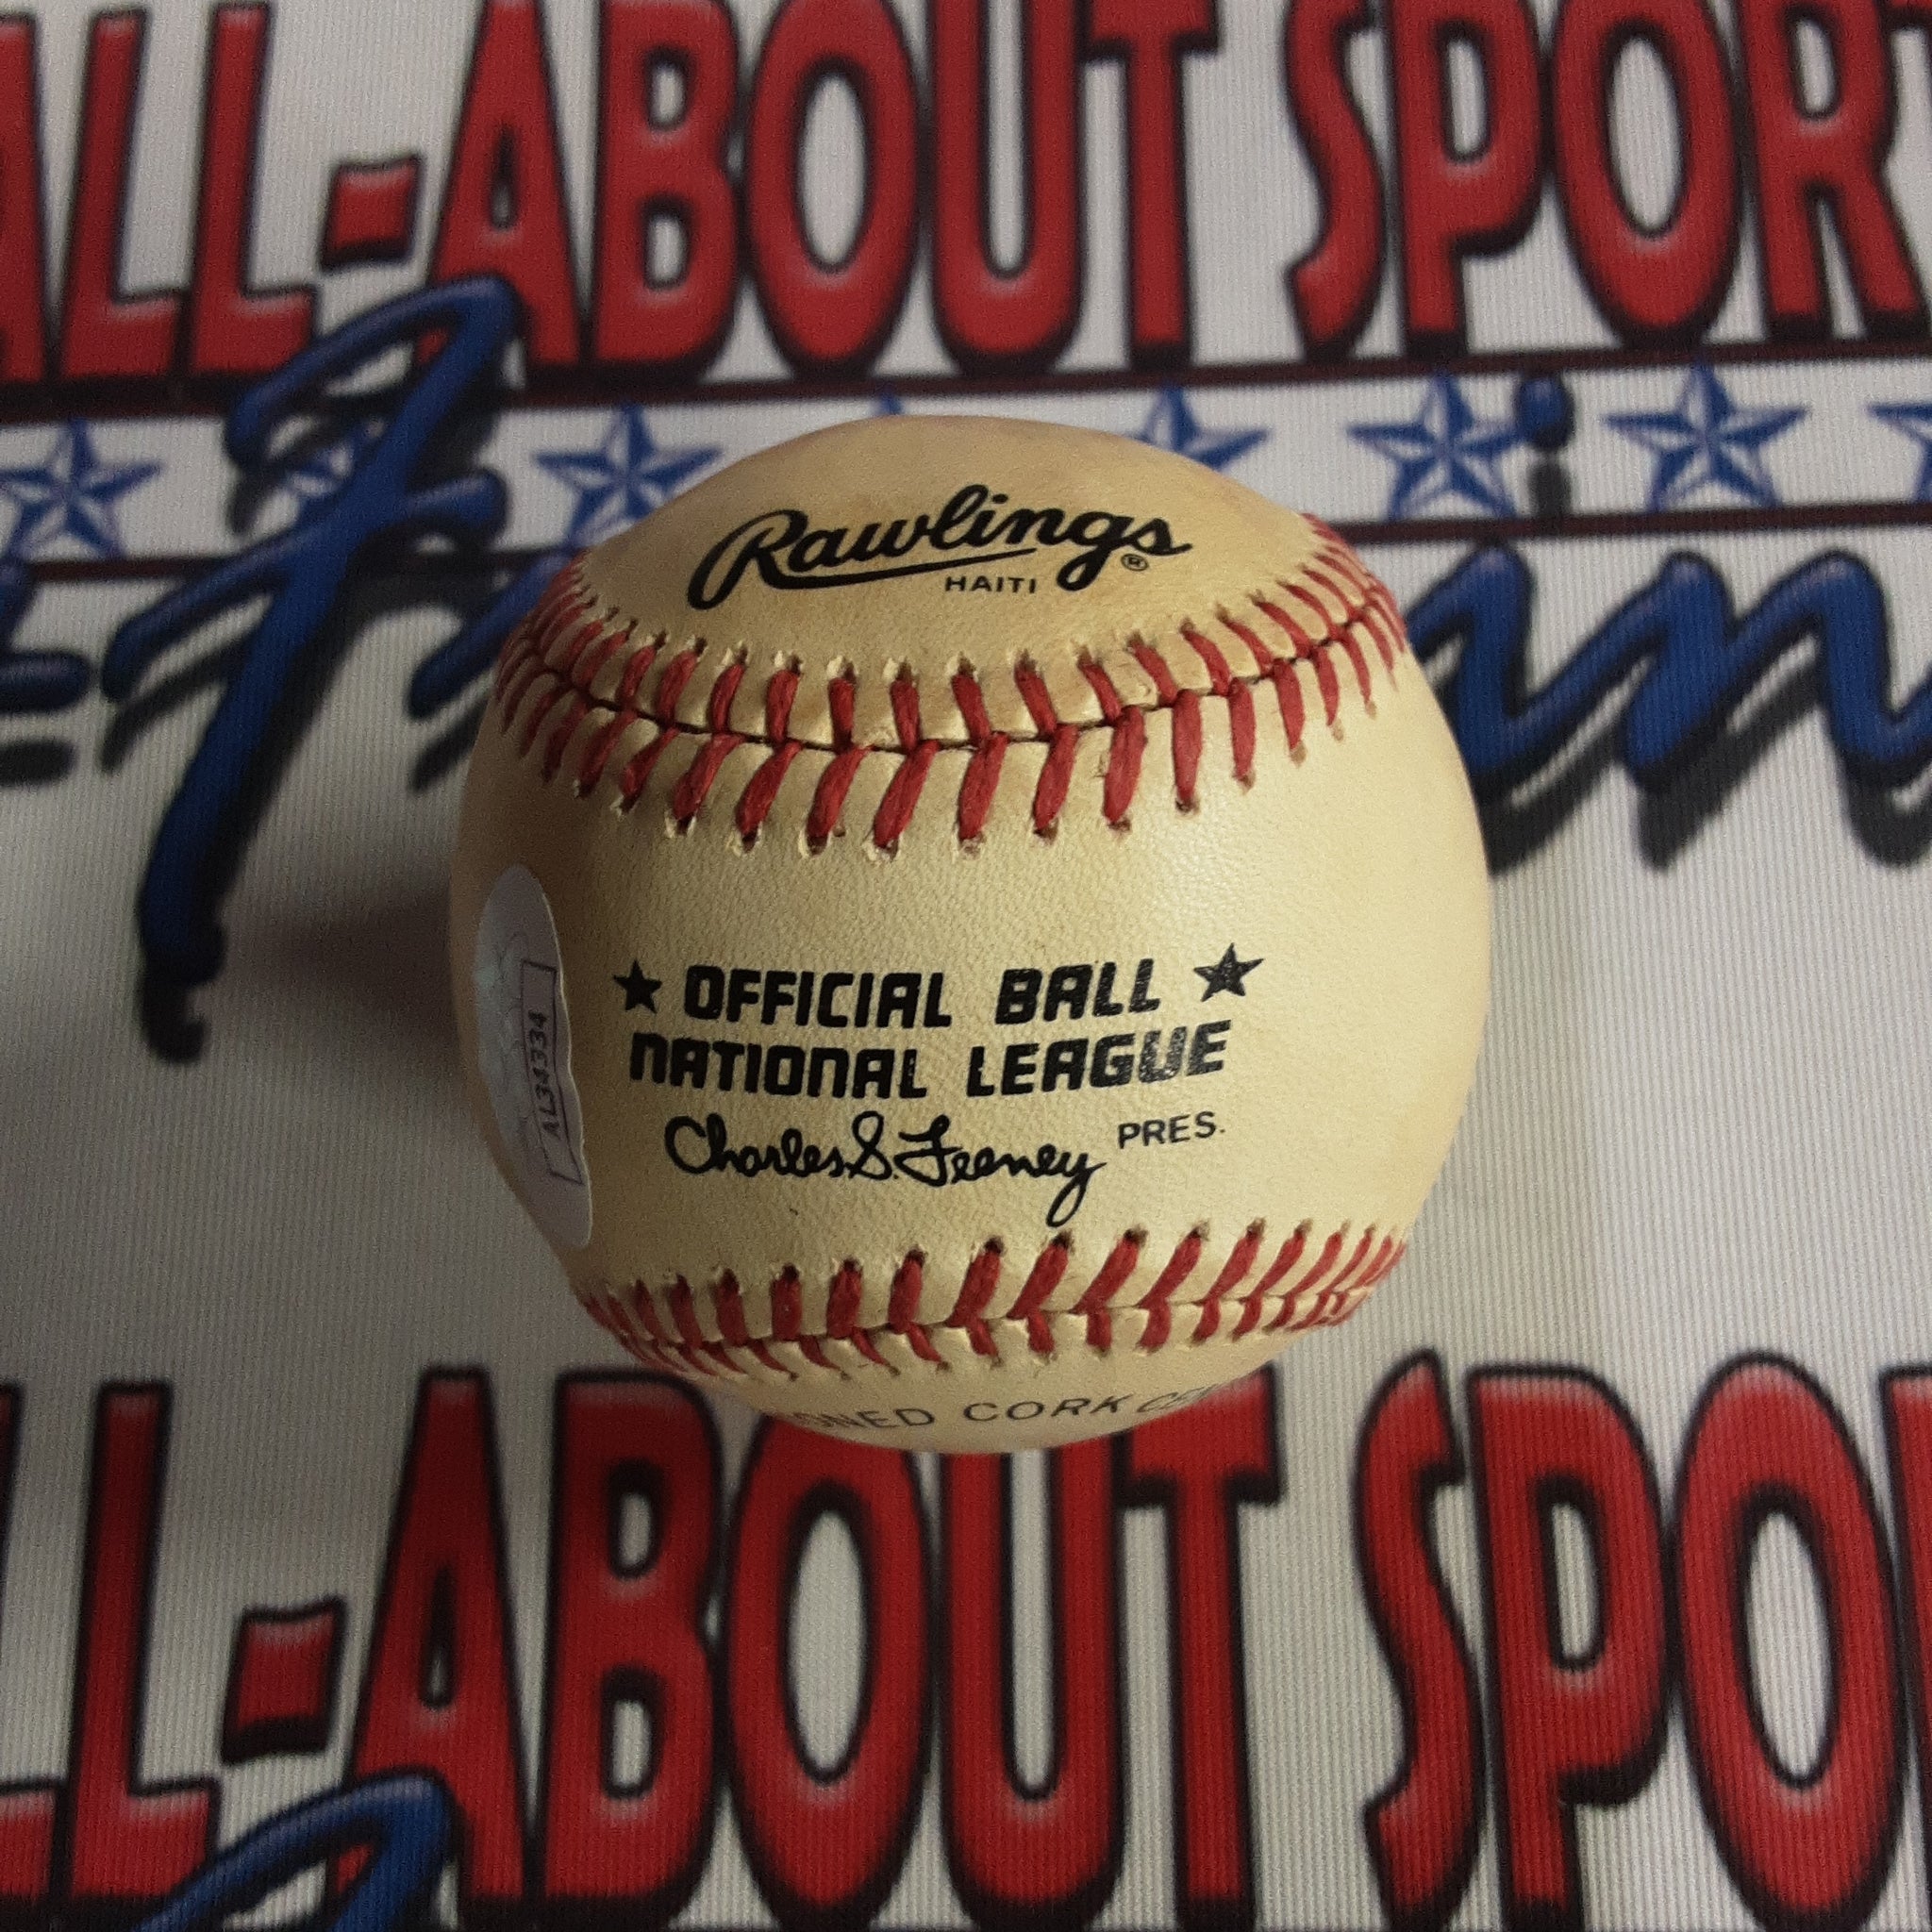 Albert Pujols Authentic Signed Rawlings Baseball Autographed JSA Lette